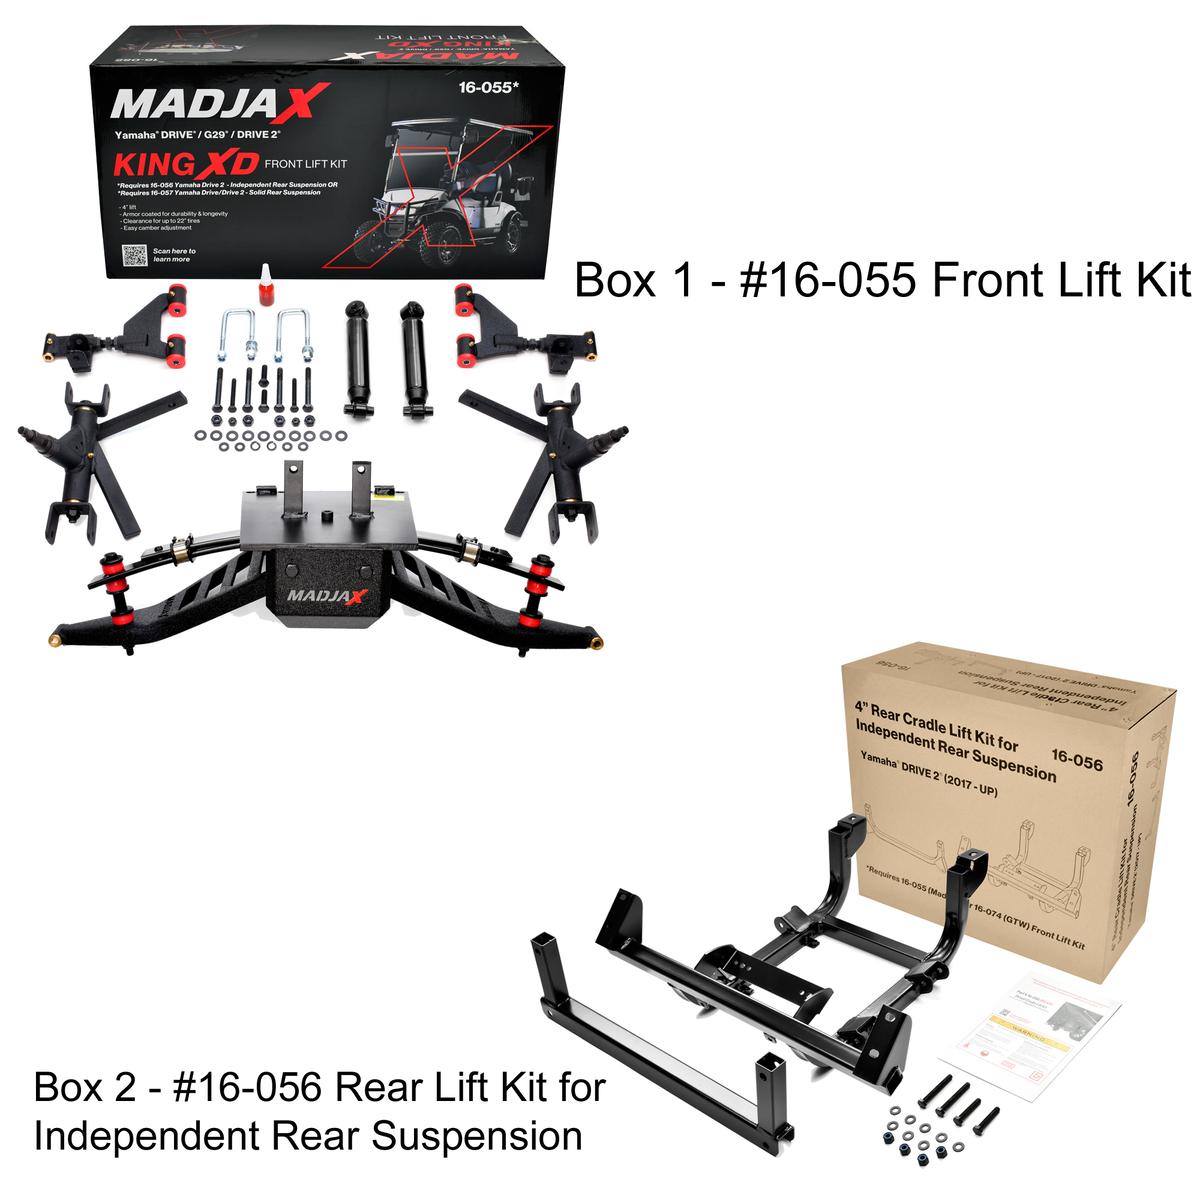 4” MadJax King XD Lift Kit for Gas Yamaha Drive2 with Independent Rear Suspension